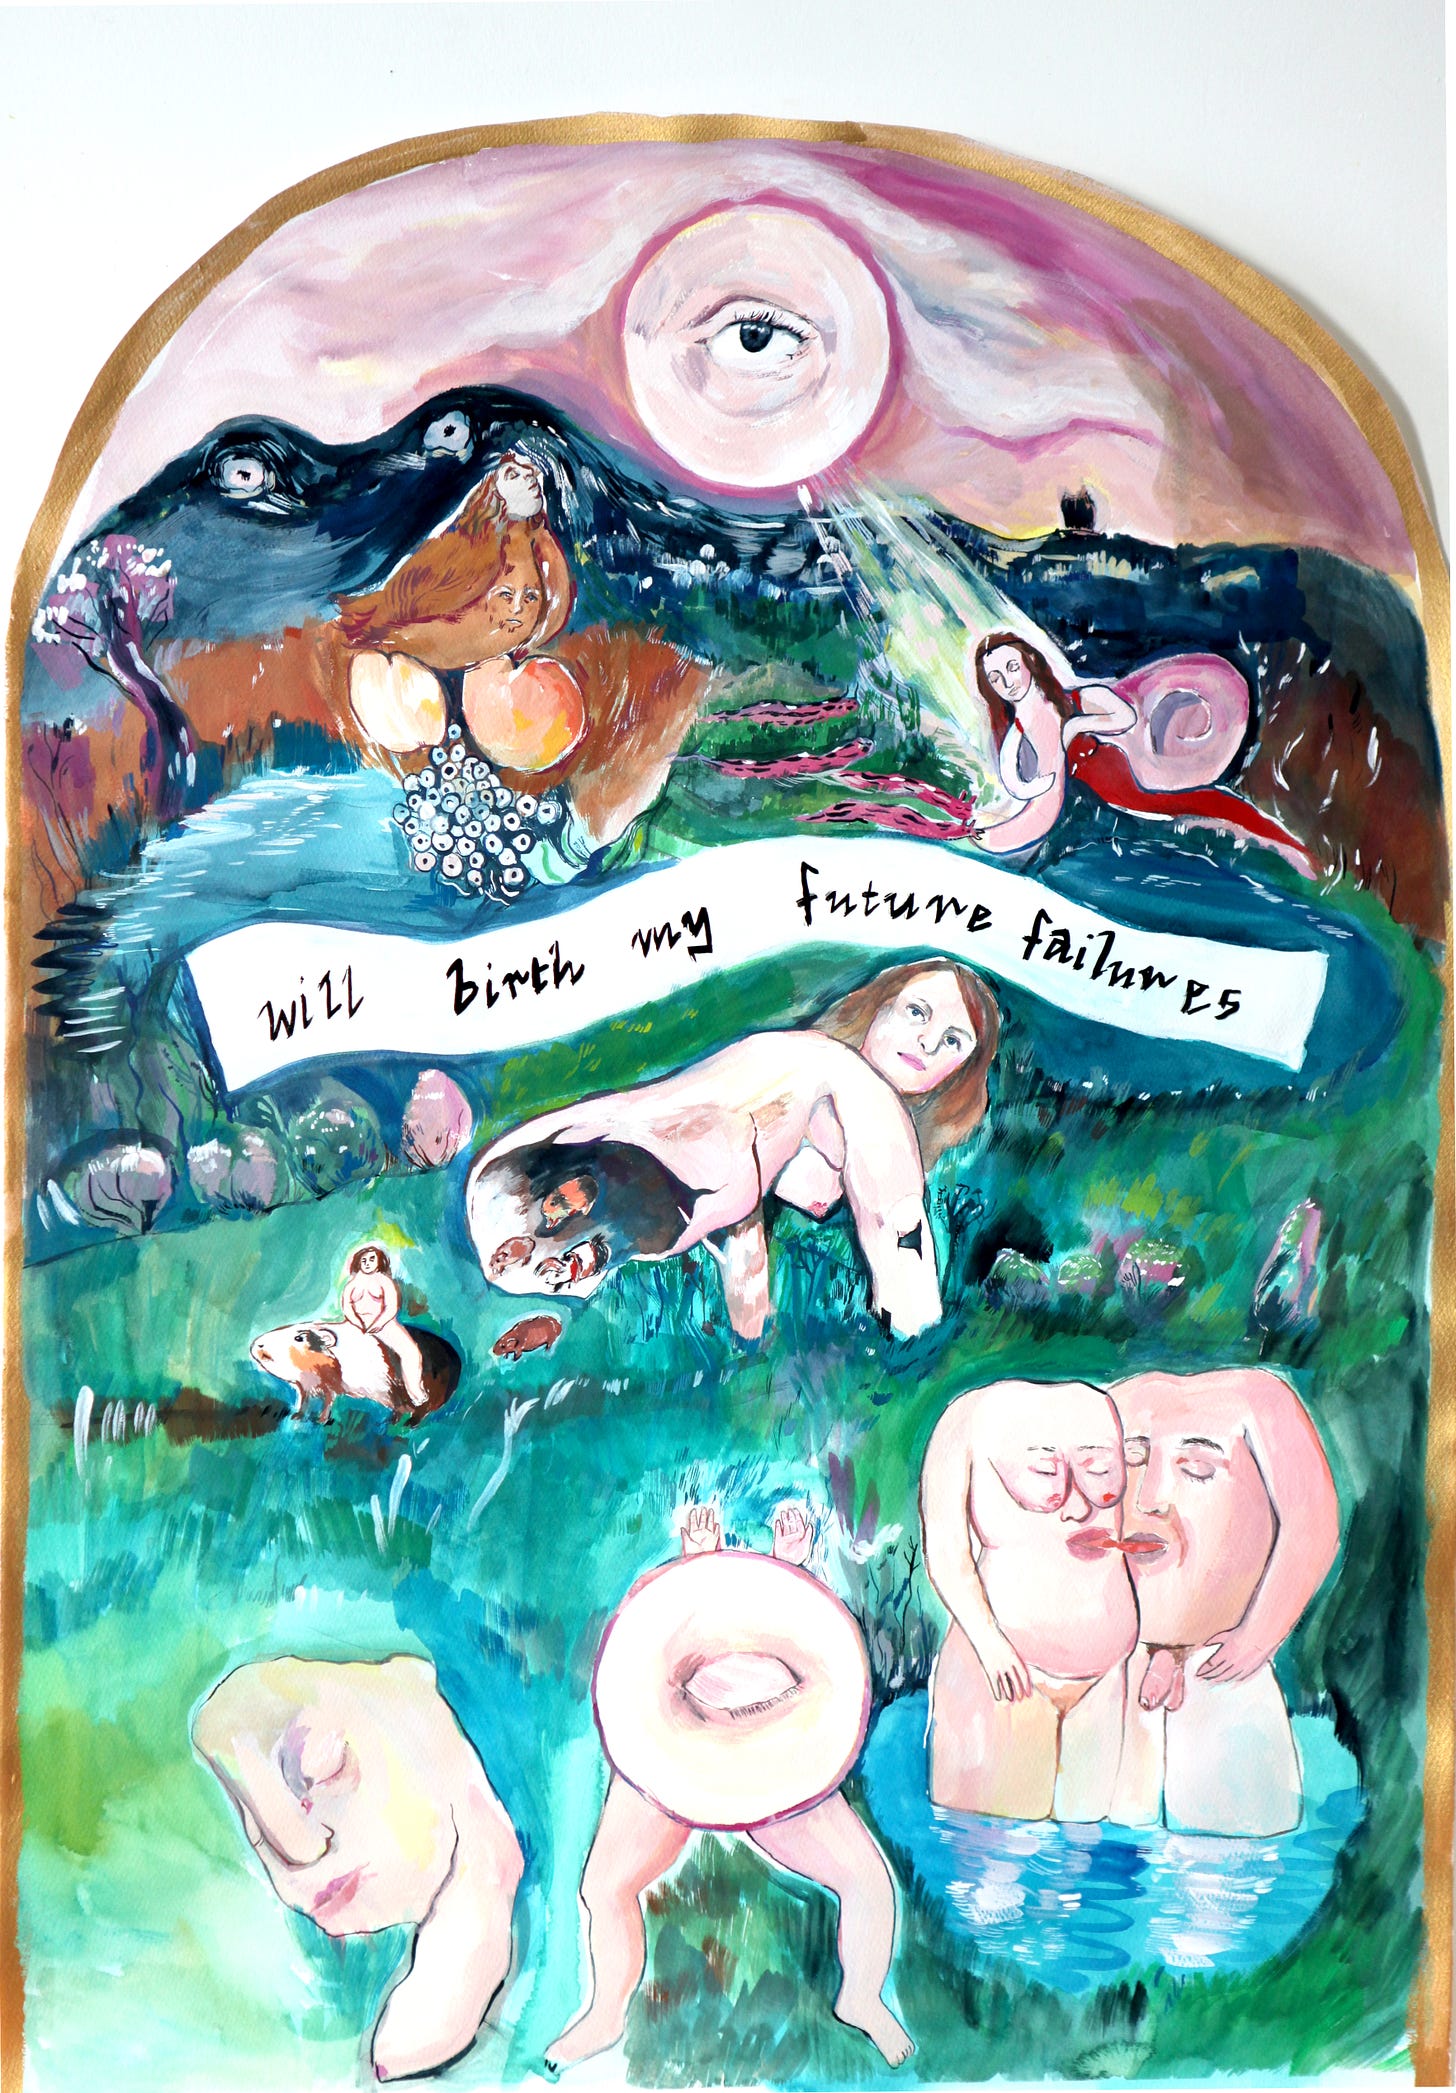 painting with landscape, chicken sitting on apples, a snail breastfeeding slugs, a tree woman giving birth to guineapigs, etc. text in image says: will birth my future failures.